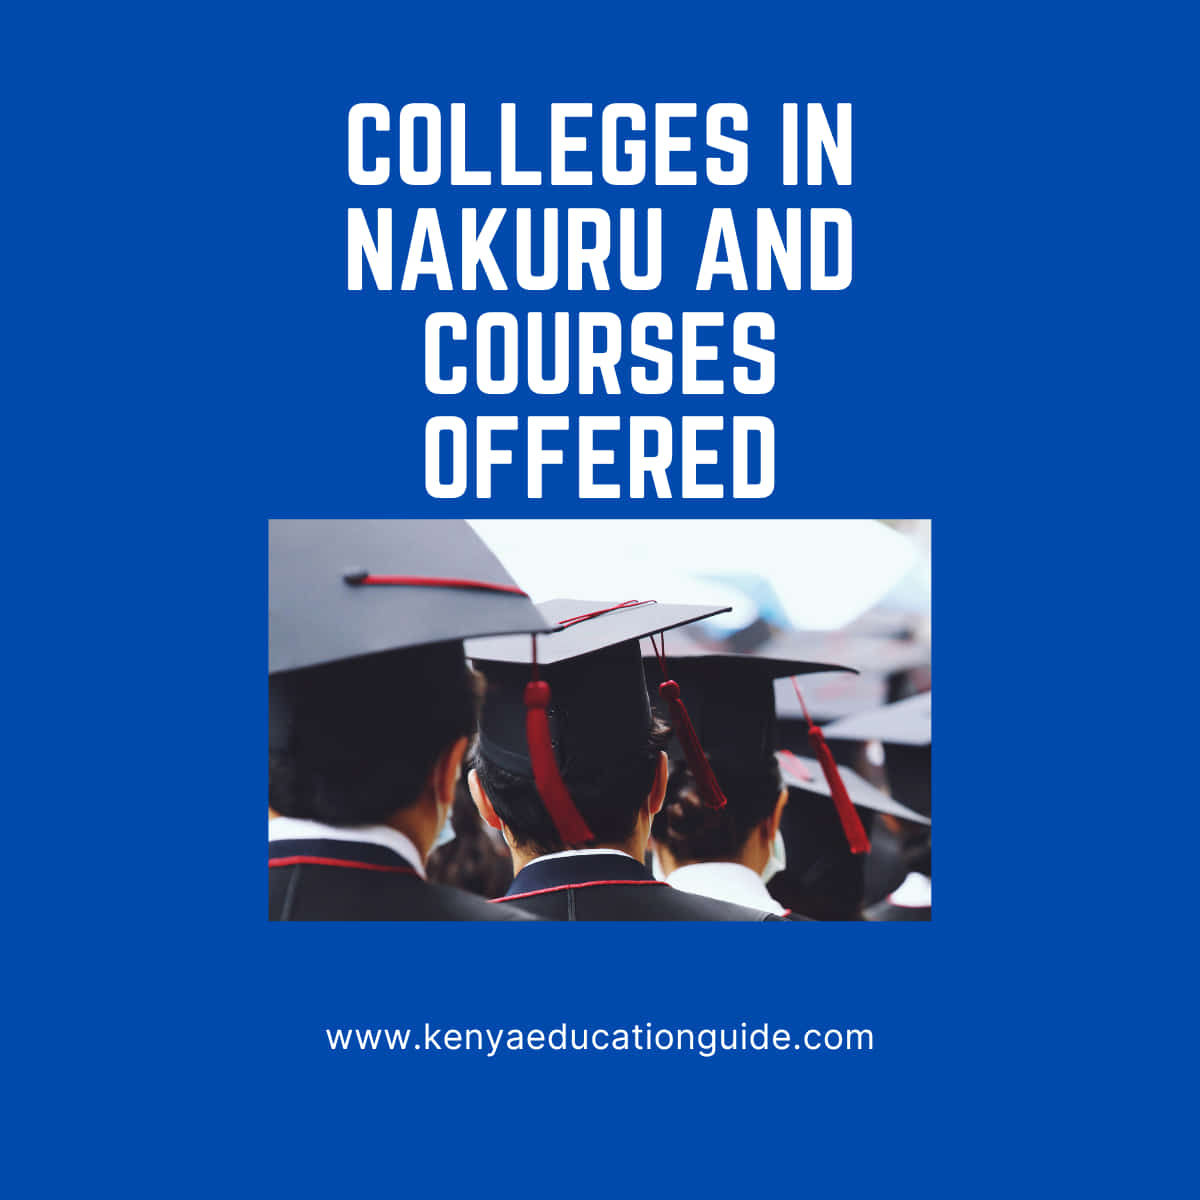 Colleges in Nakuru and courses offered